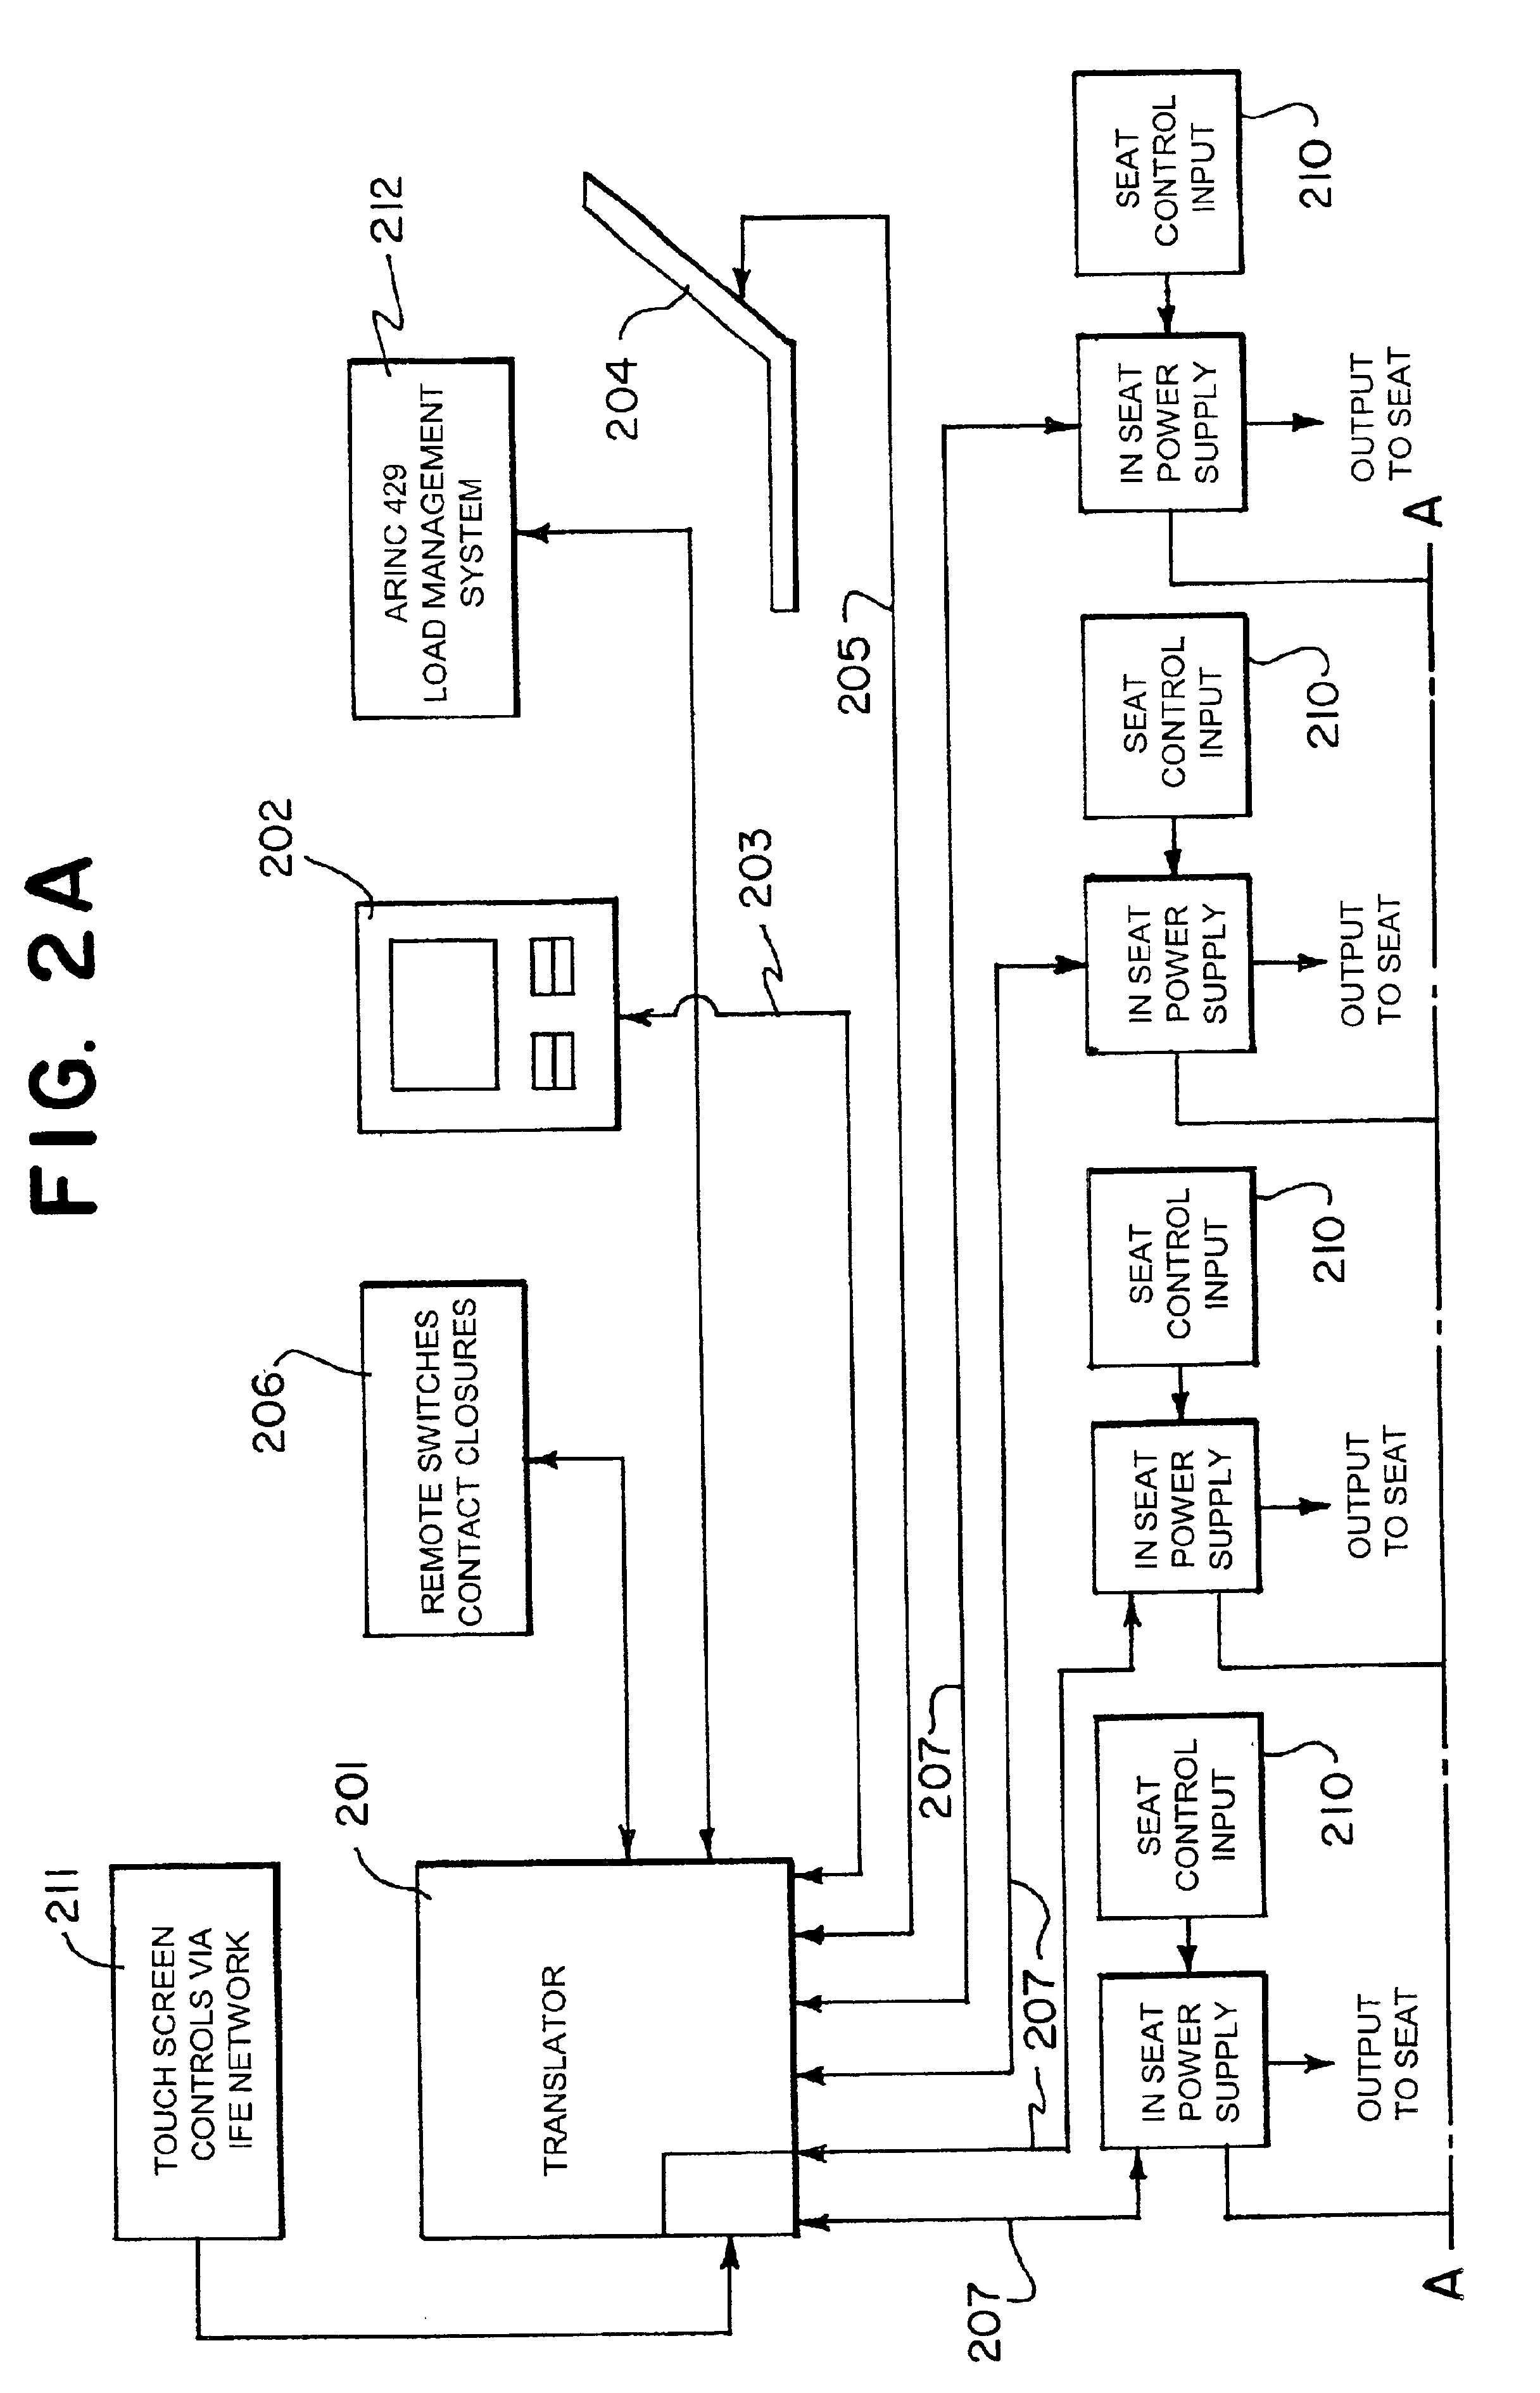 Peer-to-peer control and decision making system